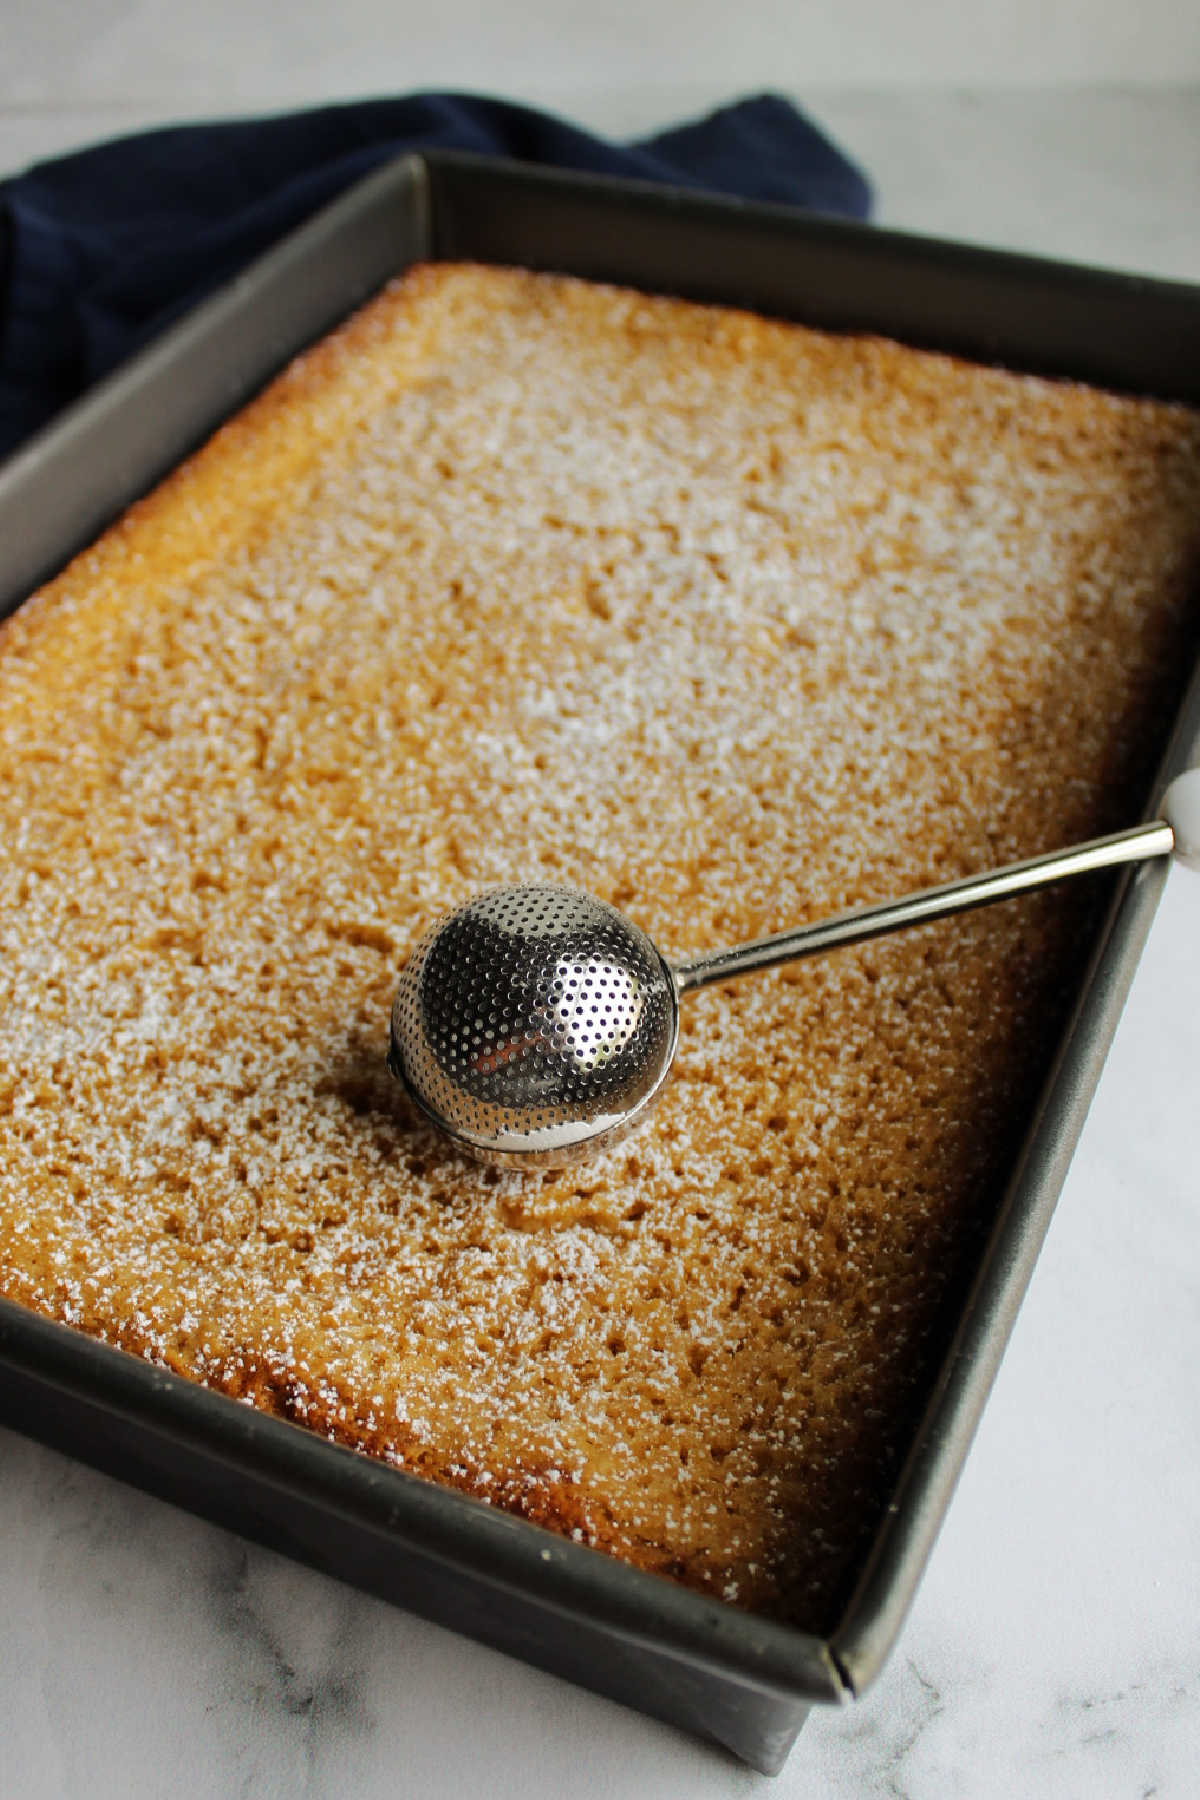 Dusting powdered sugar over cooled apple gooey butter cake.